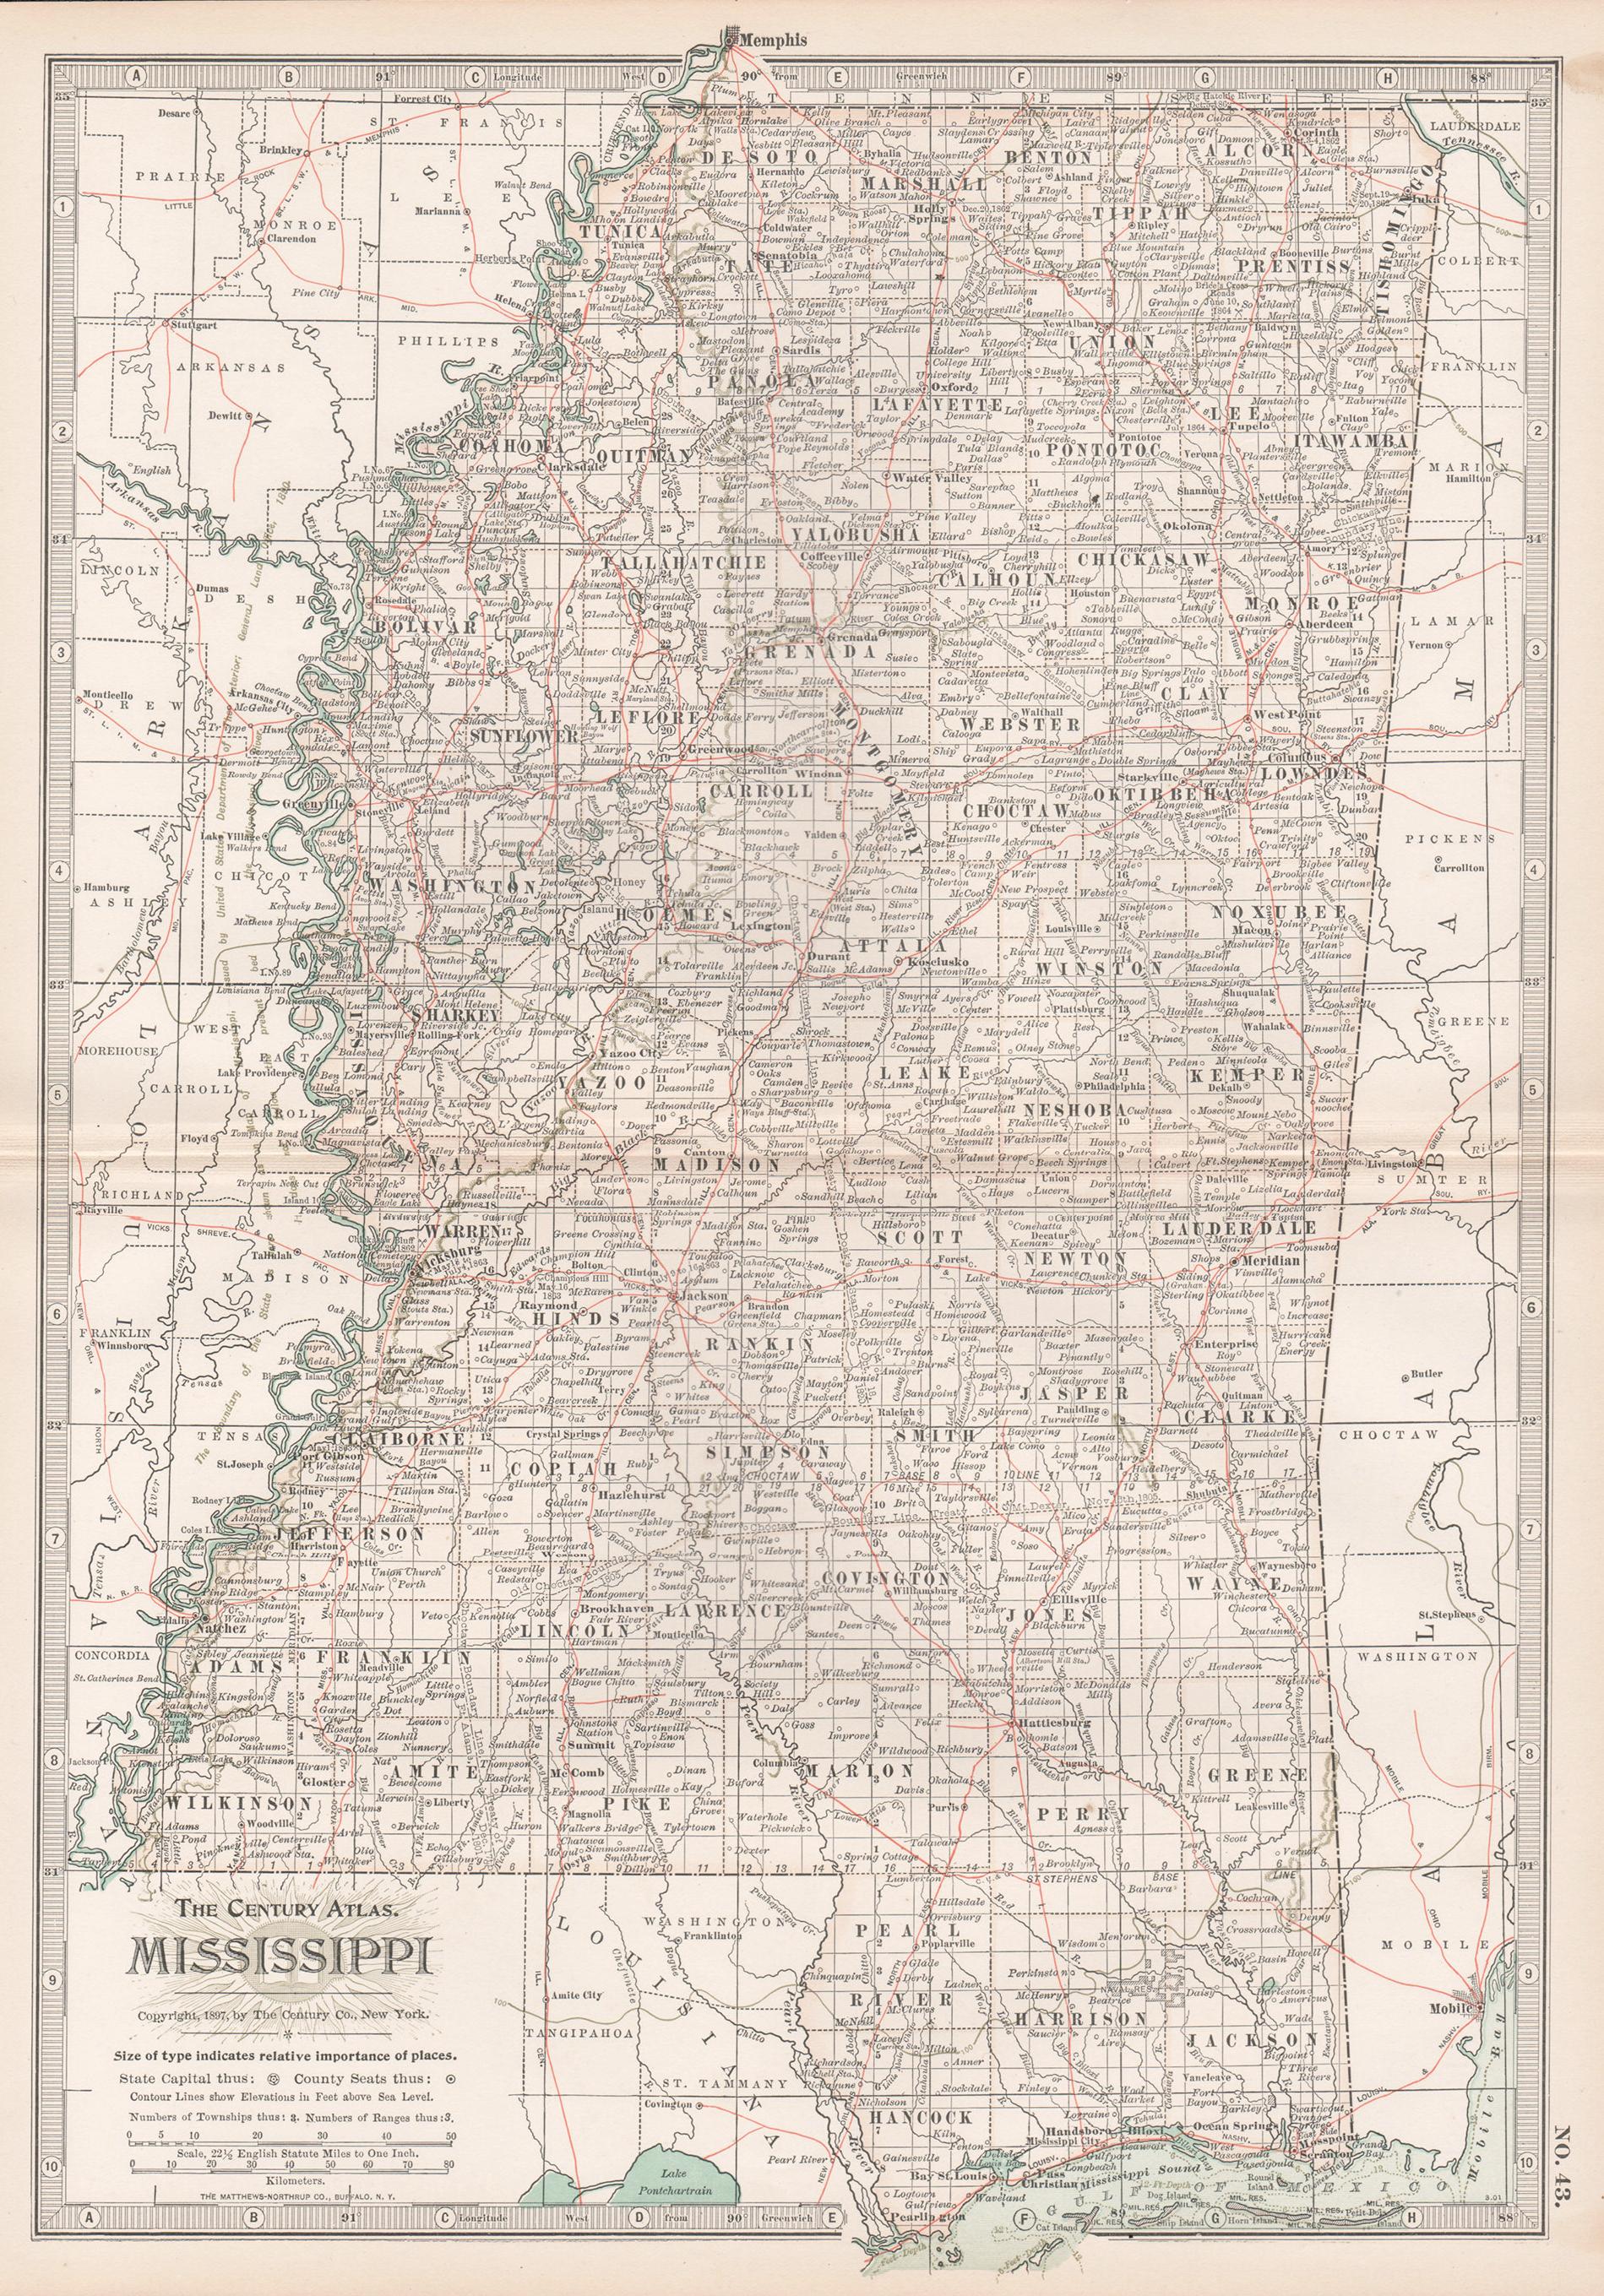 Unknown Print - Mississippi. USA Century Atlas state antique vintage map